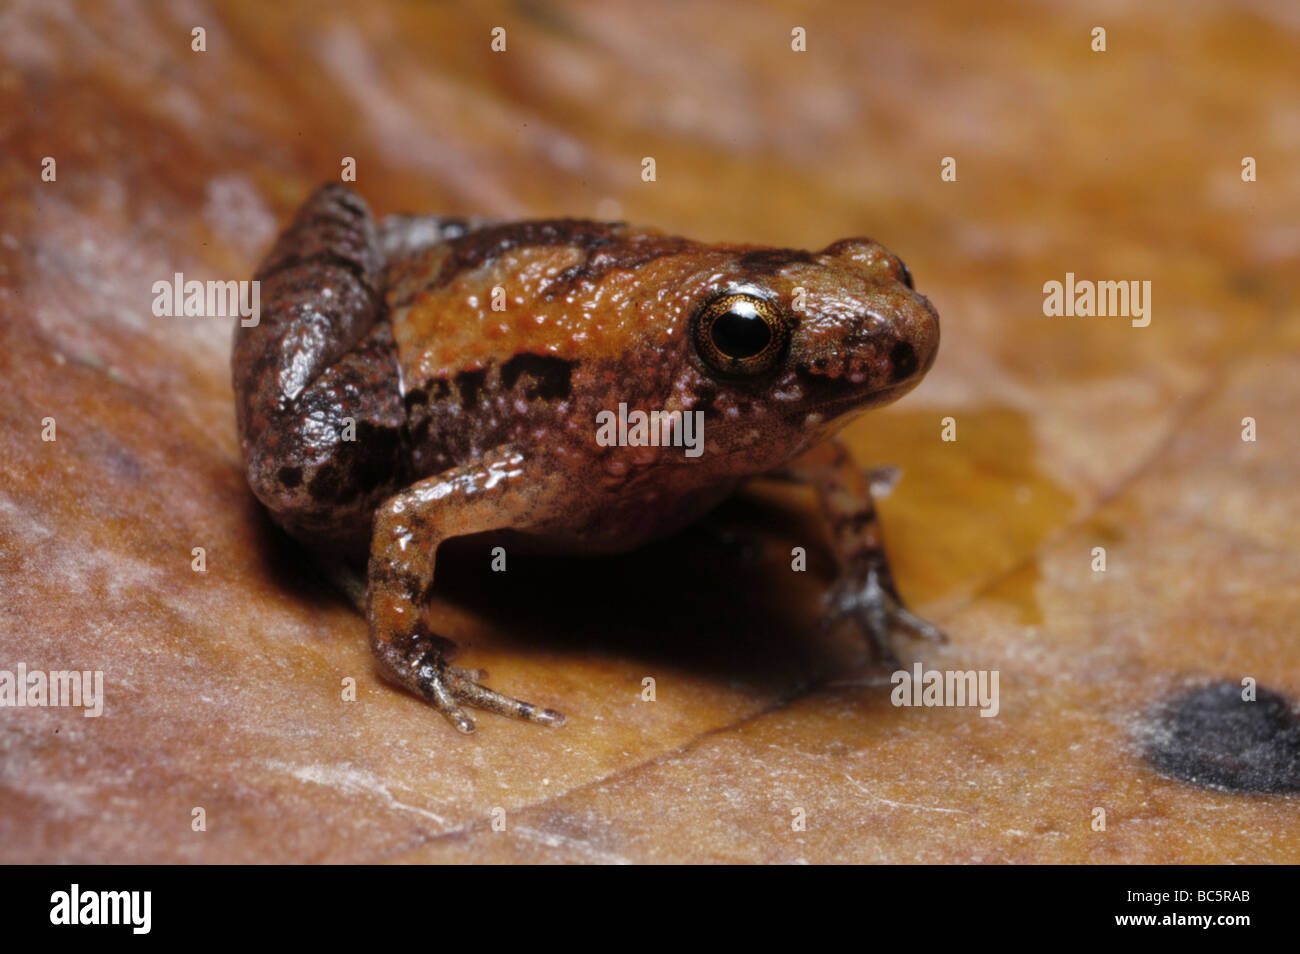 Labang Forest Rice Frog, Microhyla perparva, on a leaf. This species is very small - just 12mm. Stock Photo